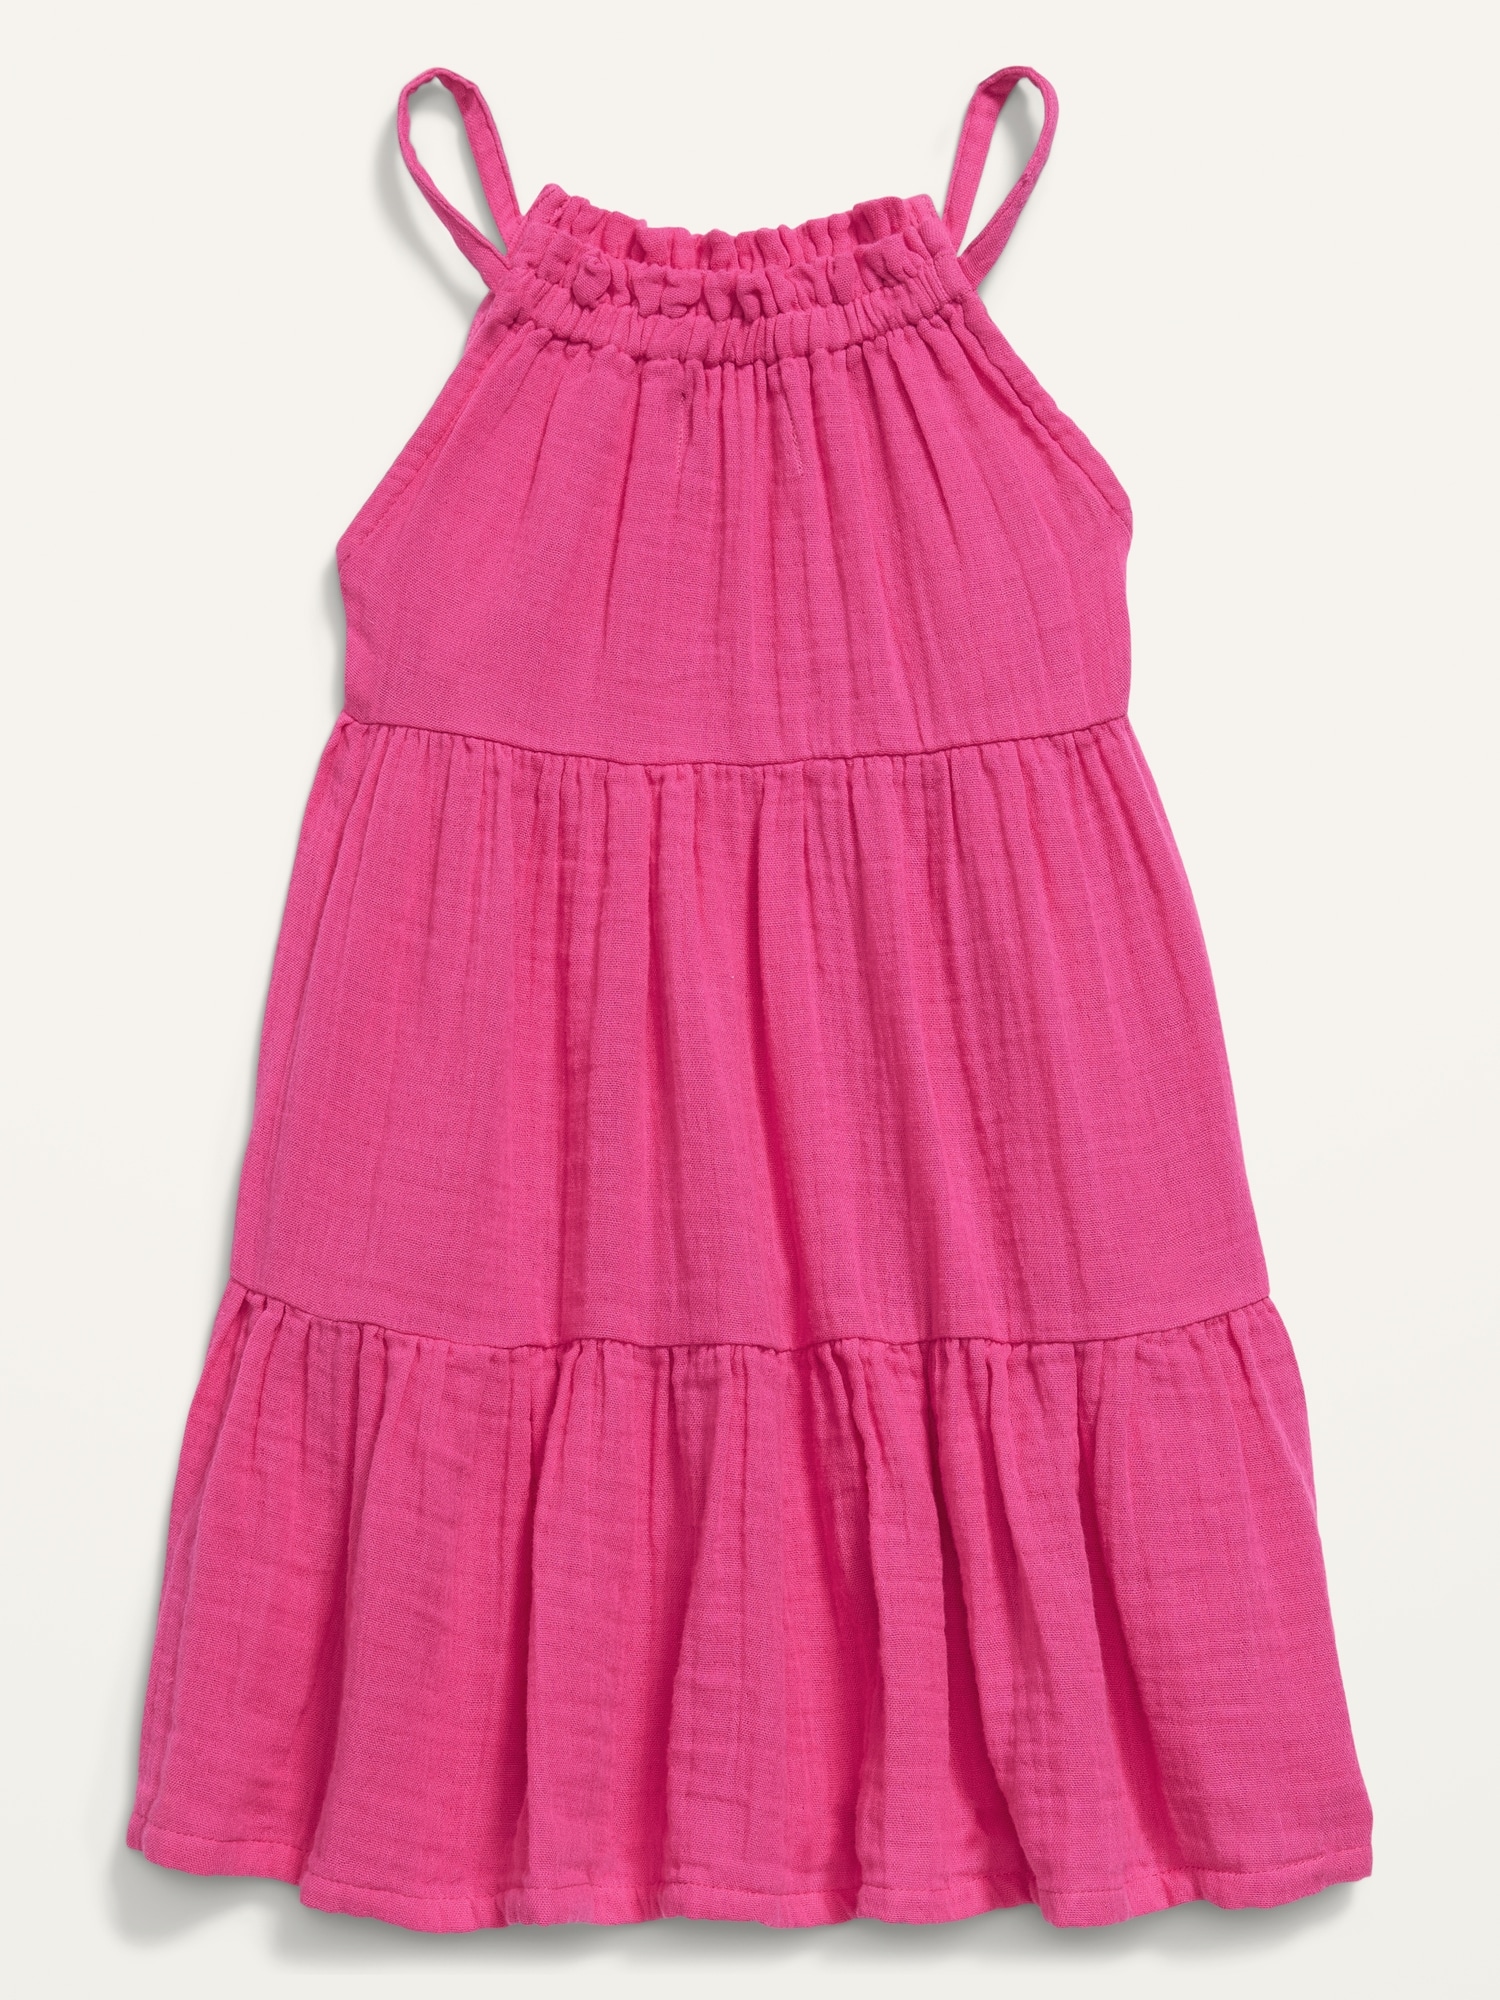 Sleeveless Tiered Swing Dress for Toddler Girls | Old Navy